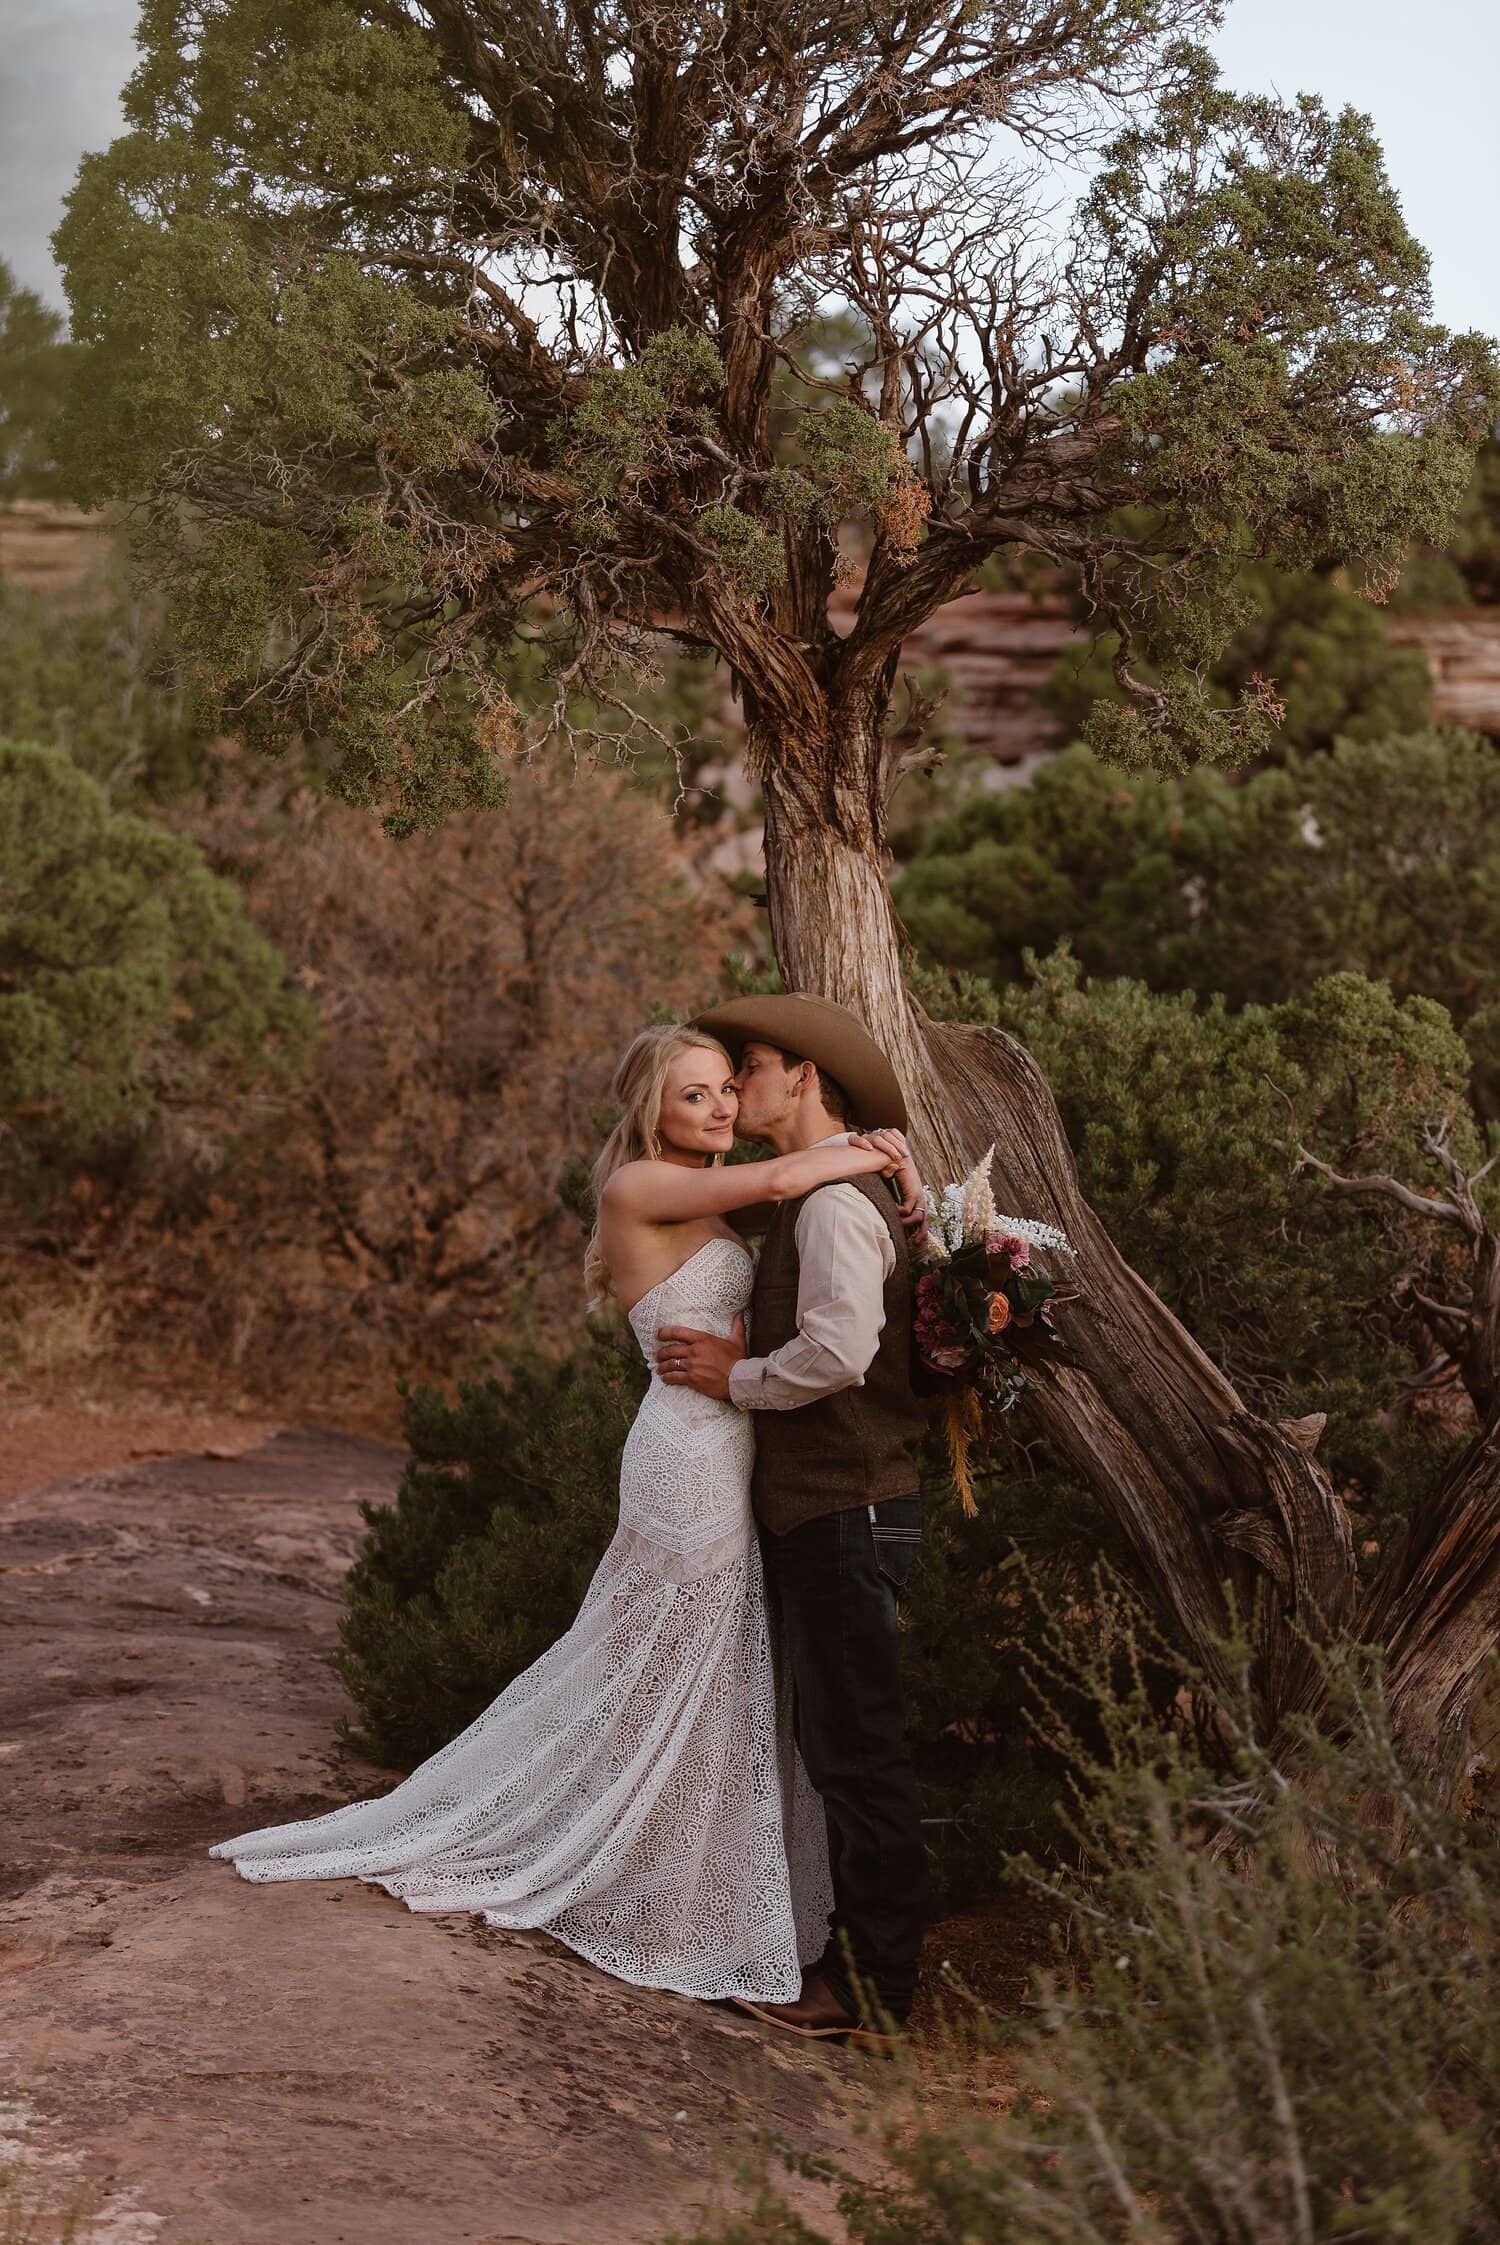 Groom kisses bride on cheek underneath a tree at Colorado National Monument. 